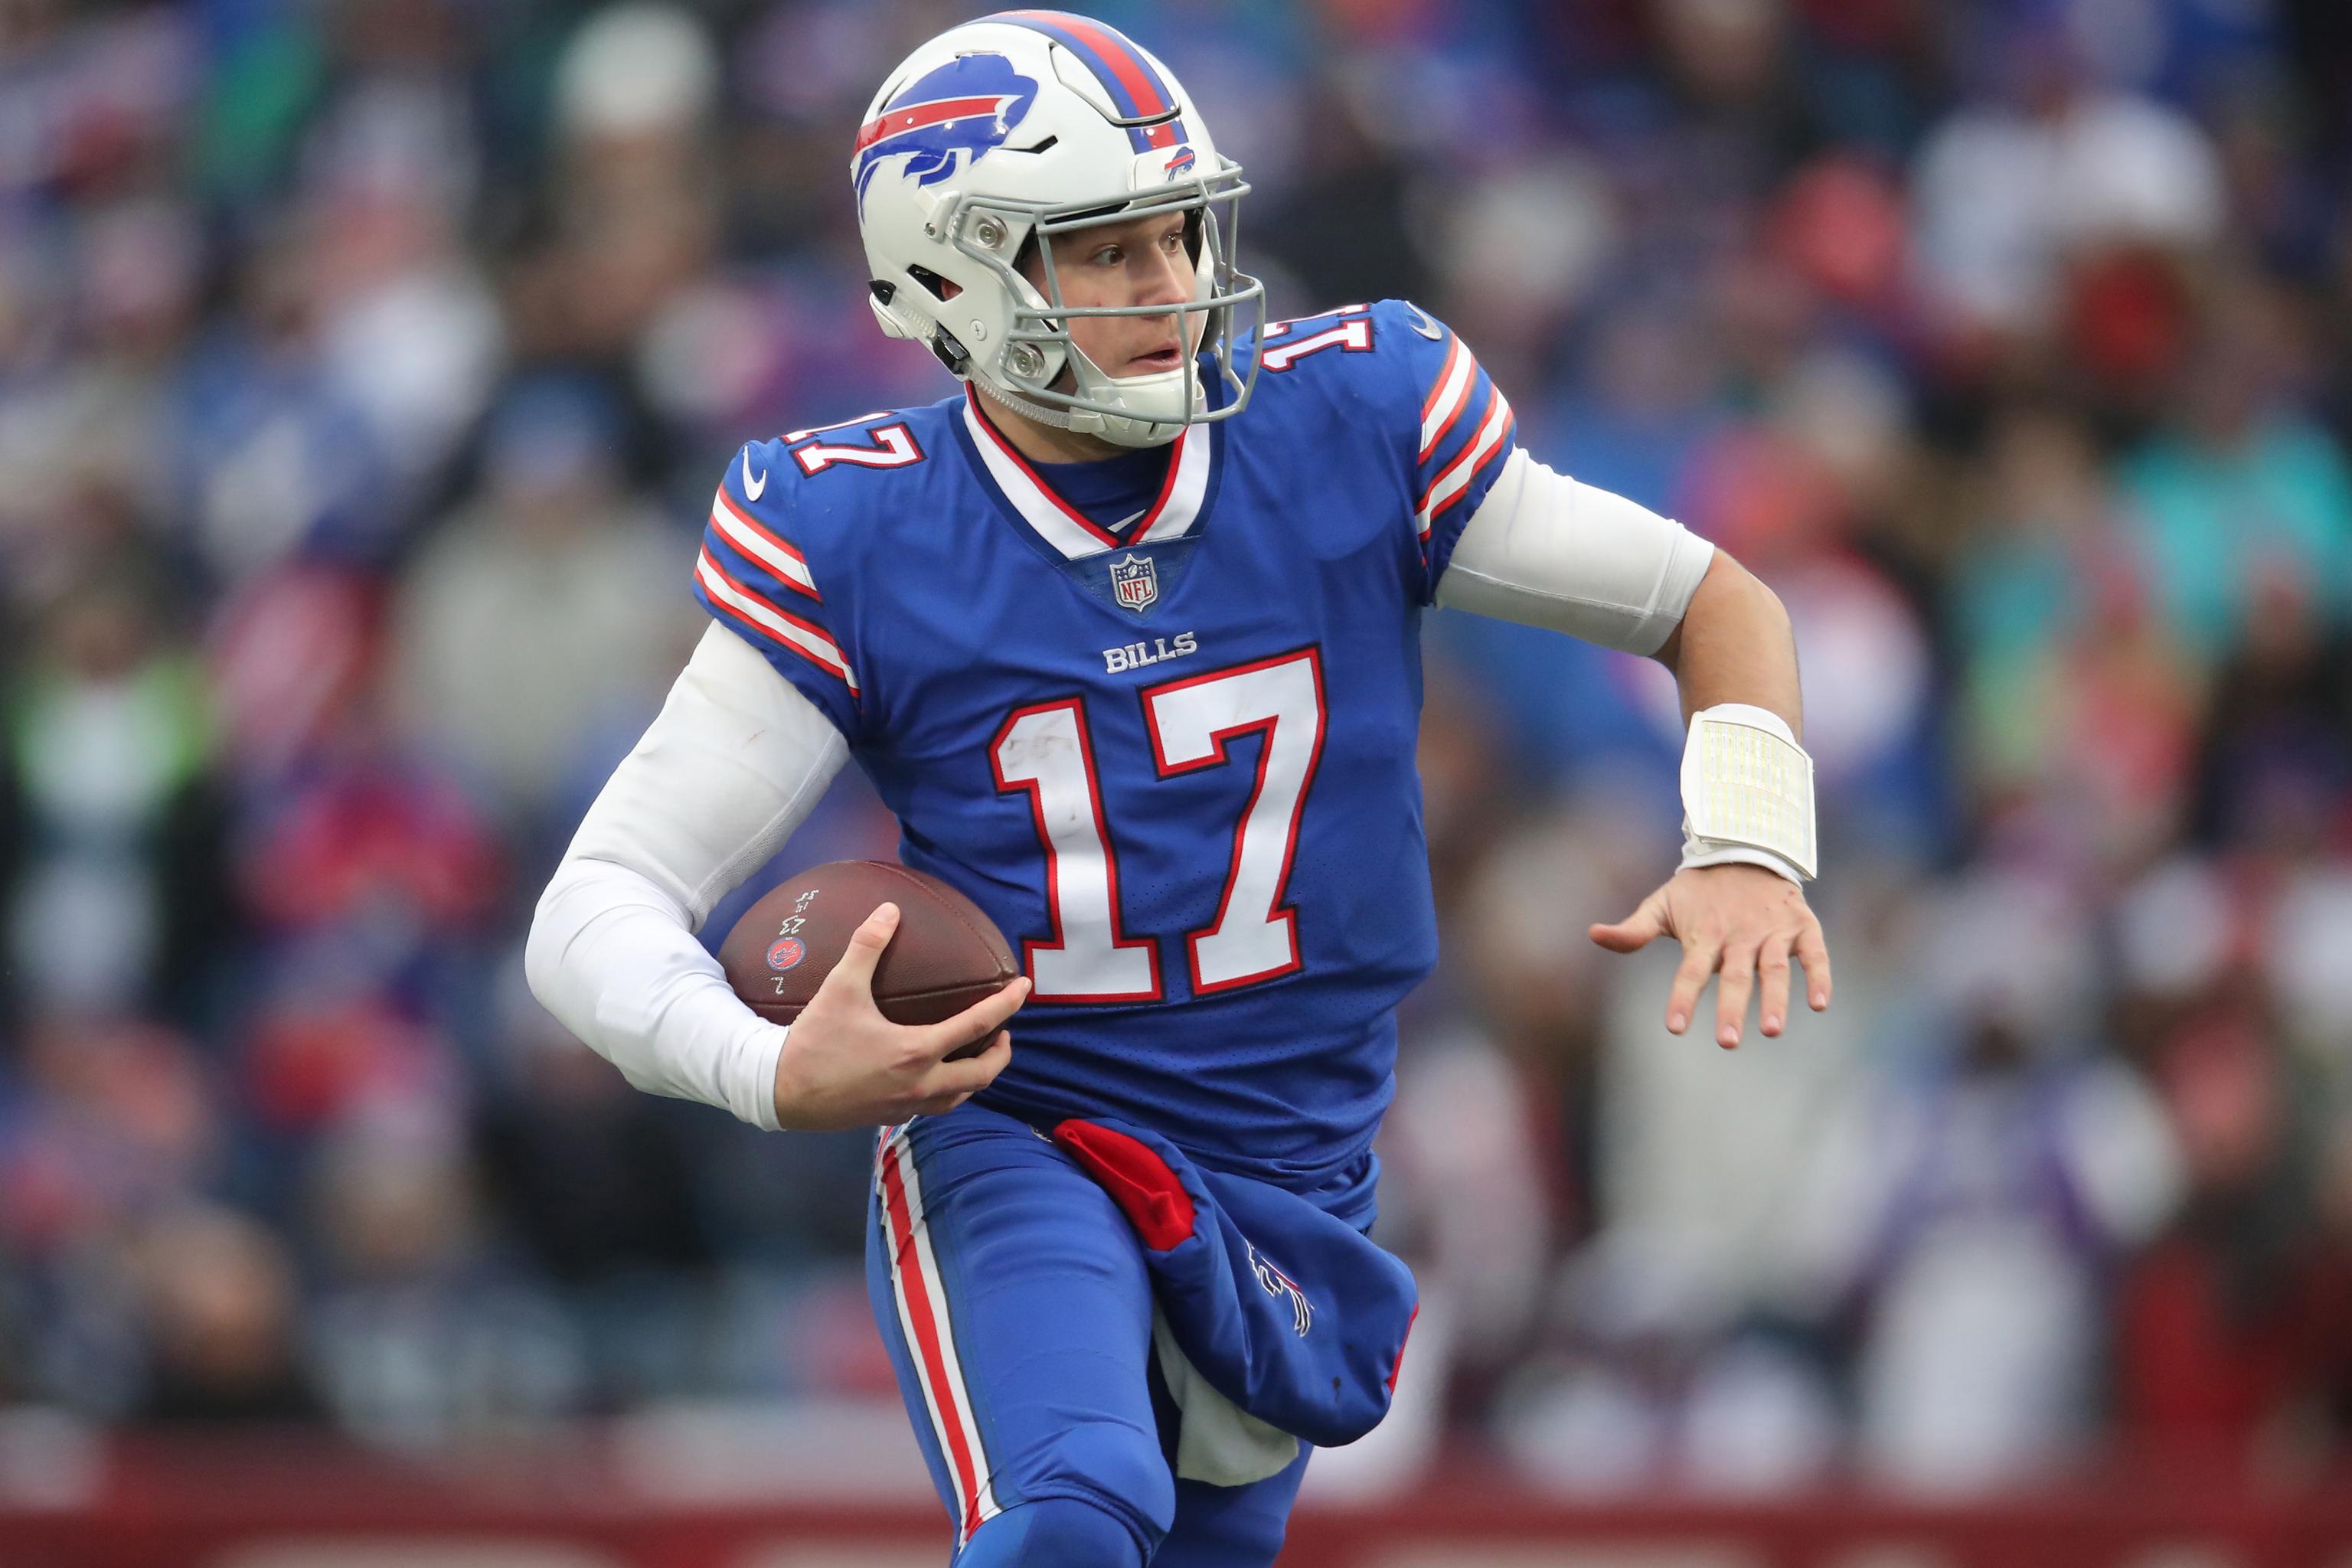 2019 Buffalo Bills Schedule: Full of Dates, Times and TV Info | Bleacher Report | Latest News, Videos and Highlights